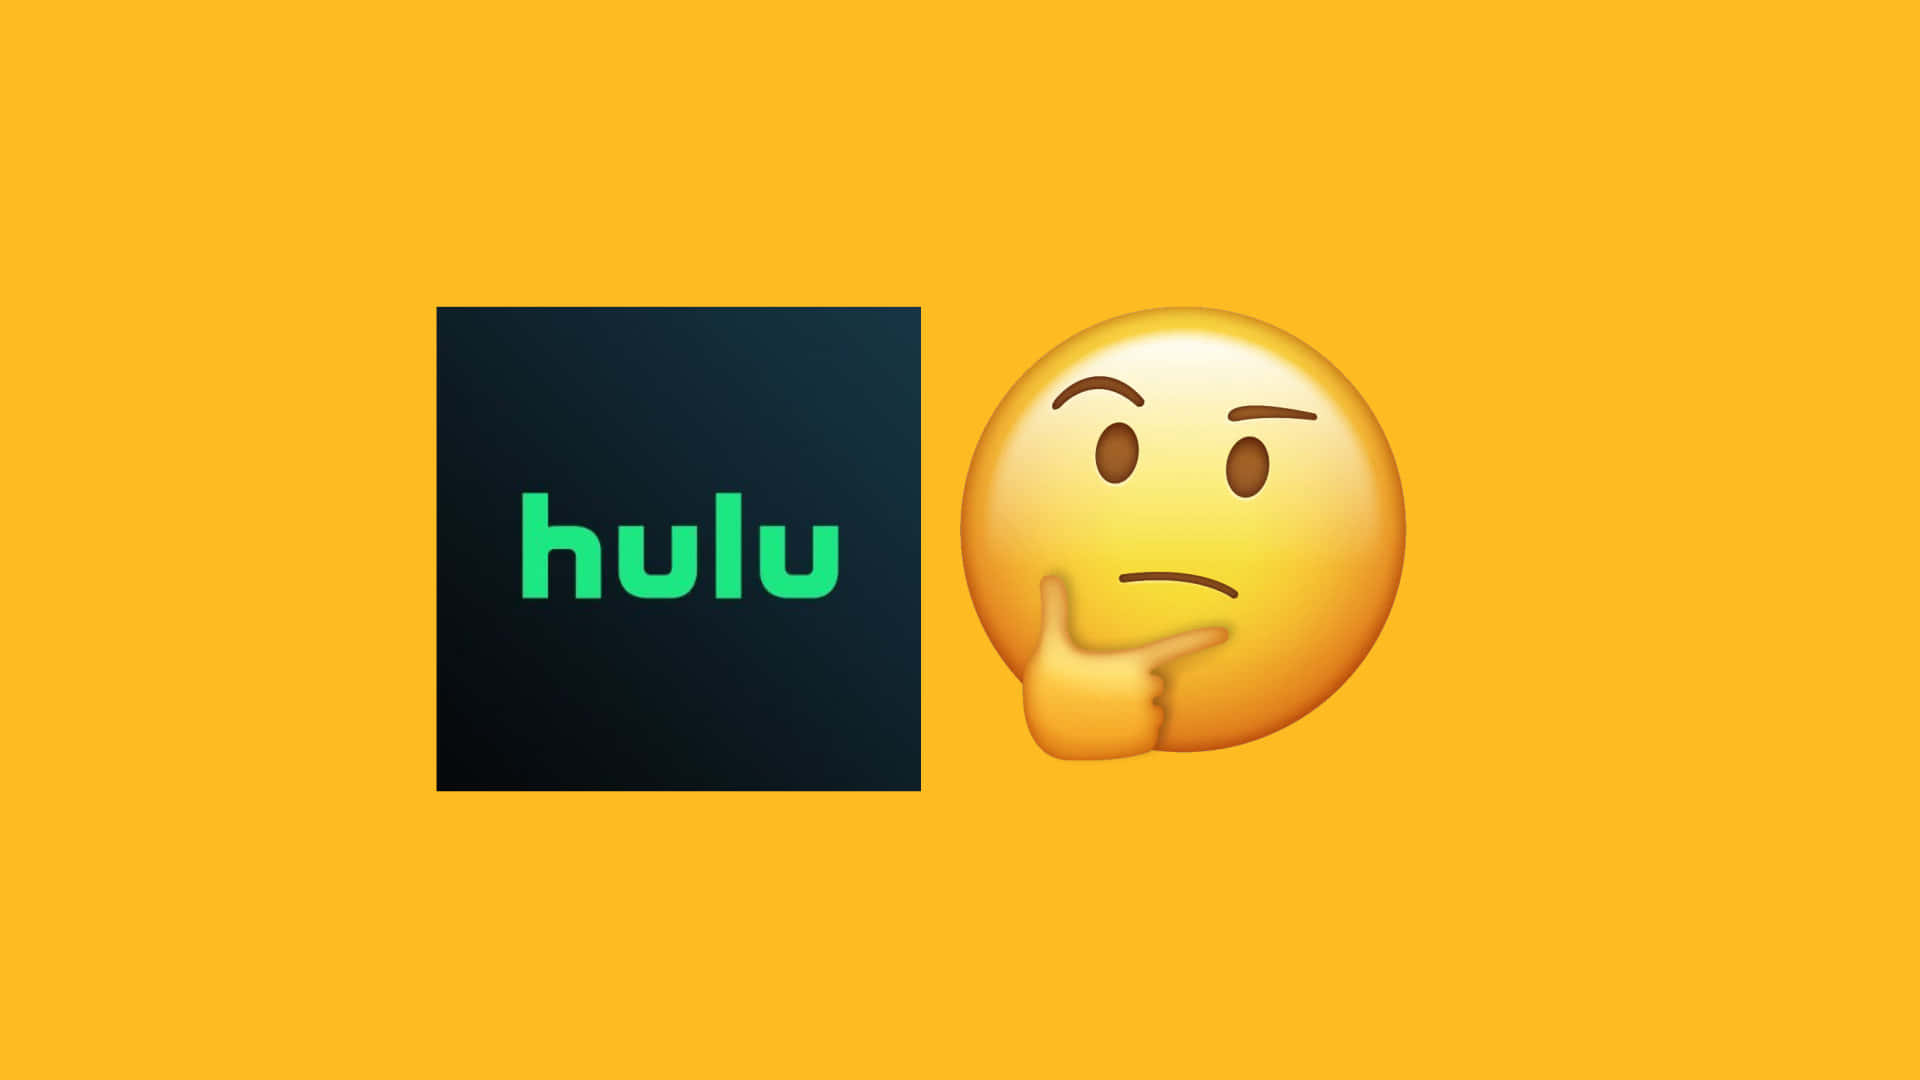 Stream the latest shows and movies on Hulu